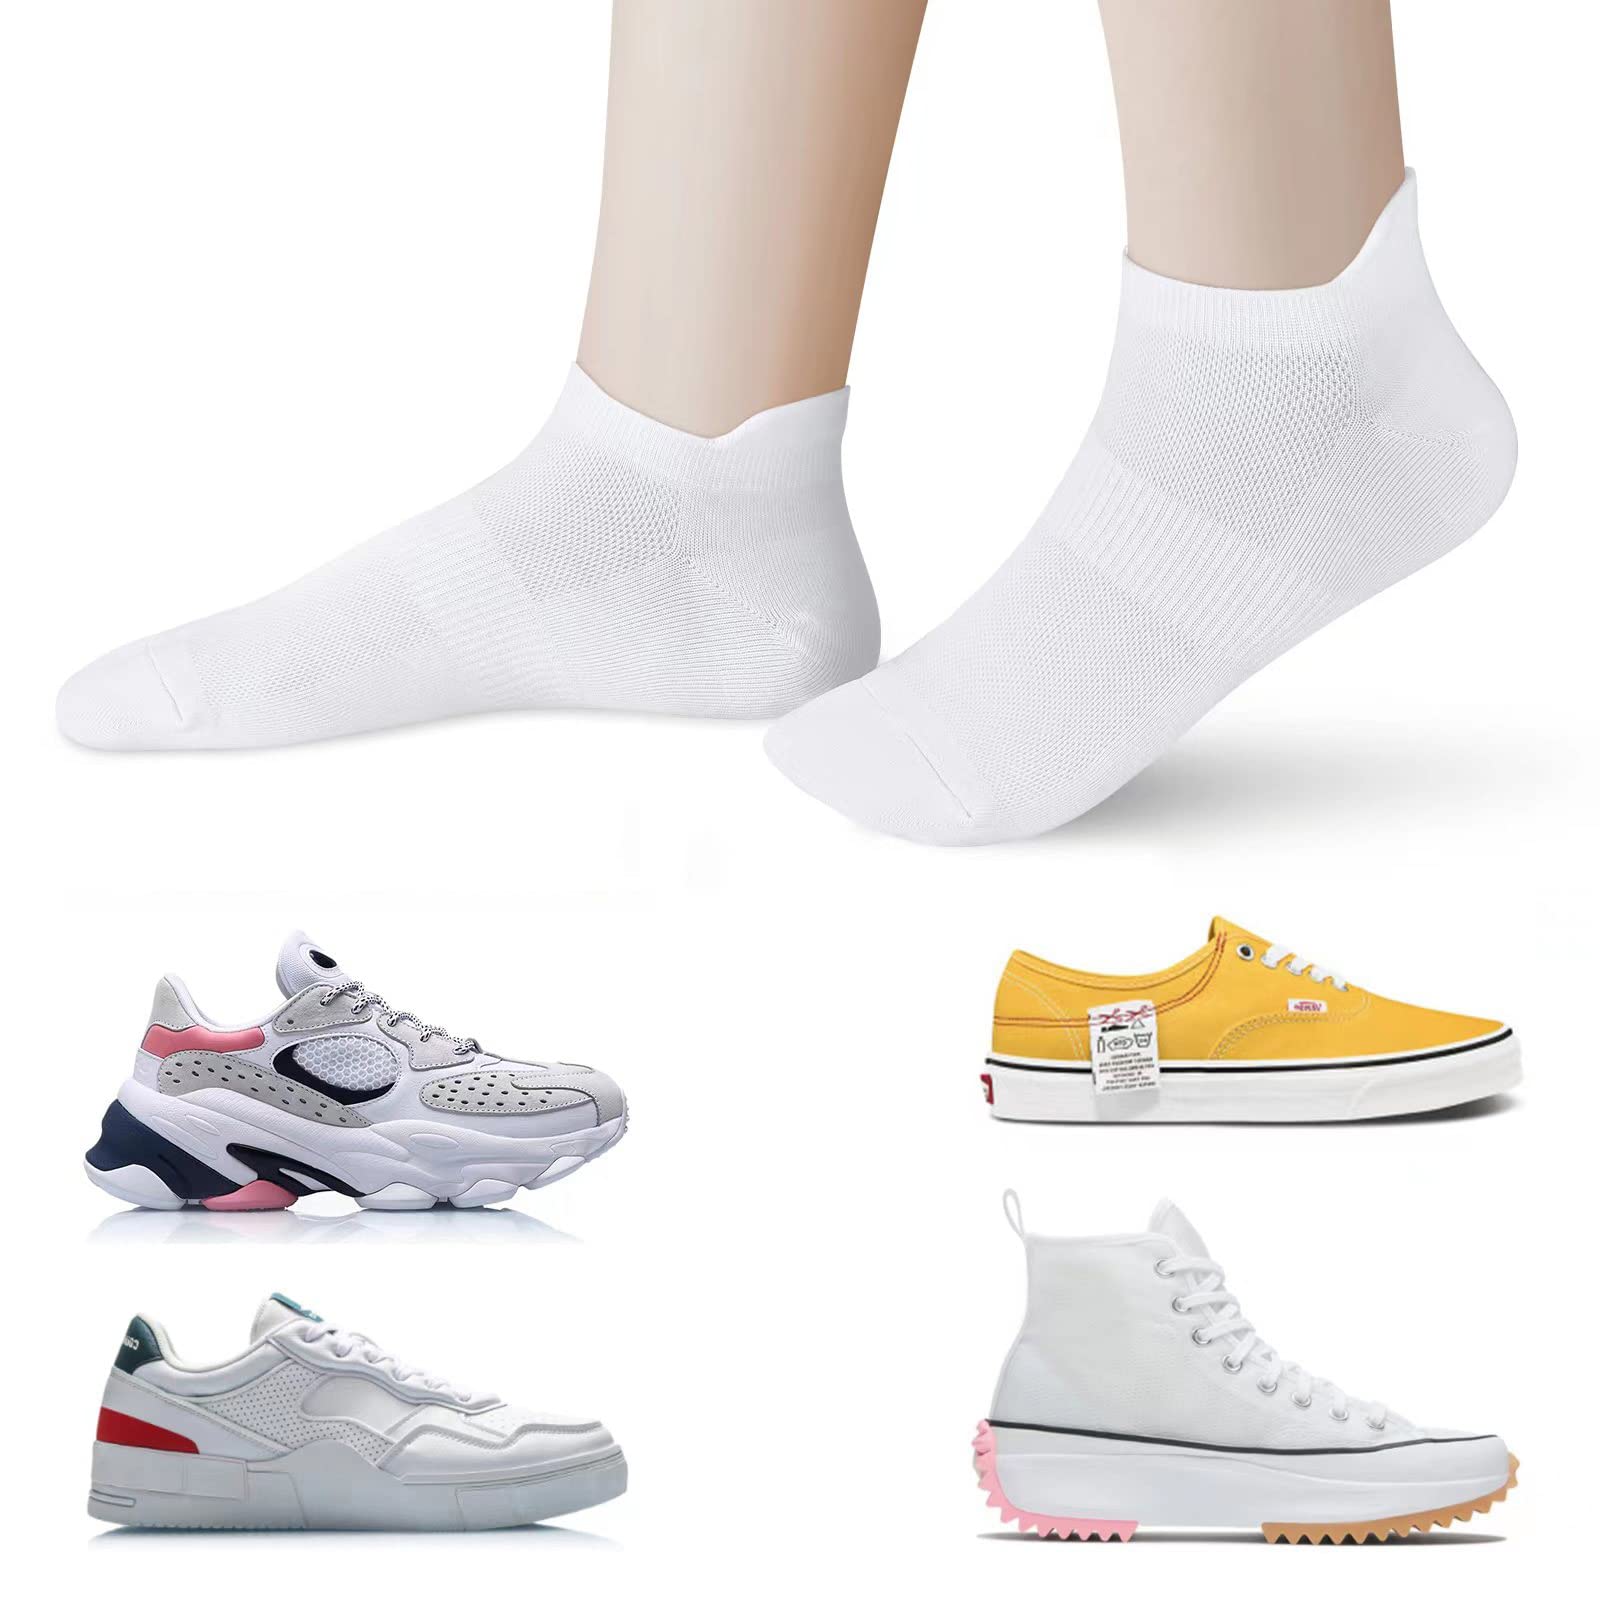 ATBITER Ankle Socks Womens and Men Thin Athletic Running Low Cut No Show Socks With Heel Tab 6/8-Pairs